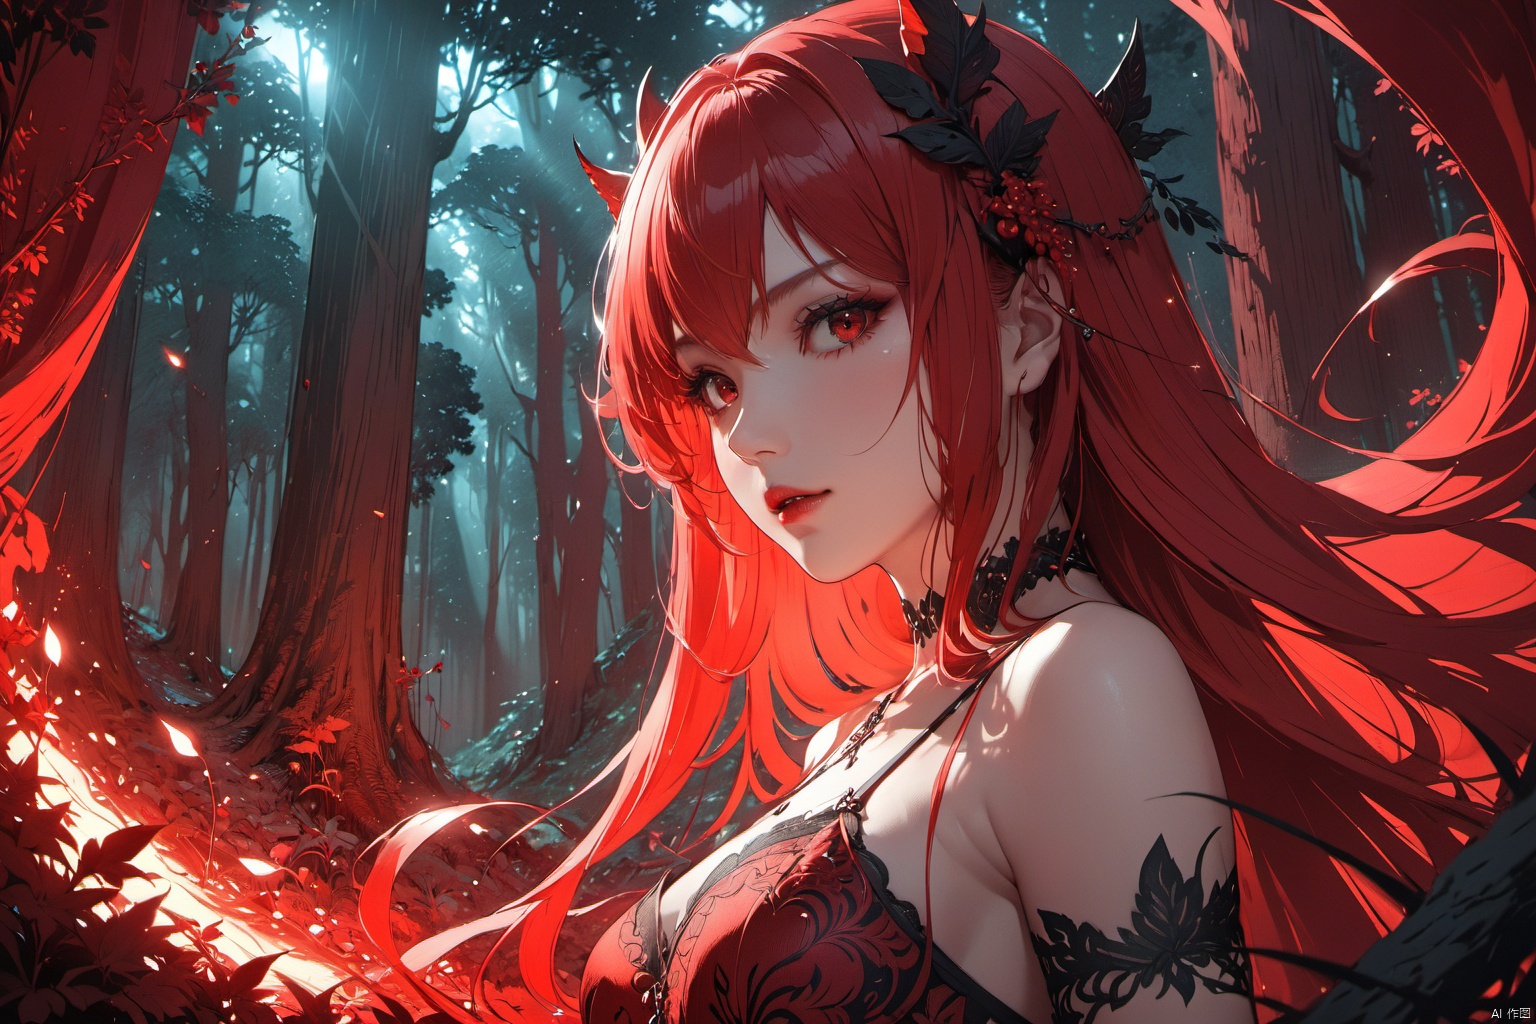  ultra-detailed,(best quality),((masterpiece)),(highres),original,extremely detailed 8K wallpaper,(an extremely delicate and beautiful),anime,detail face and eyes, perfect hands,  (close up , solo),   Red theme, 

An anime illustration of a succubus with flowing long hair, set in a forest with cinematic lighting effects that create striking contrasts between light and shadow.